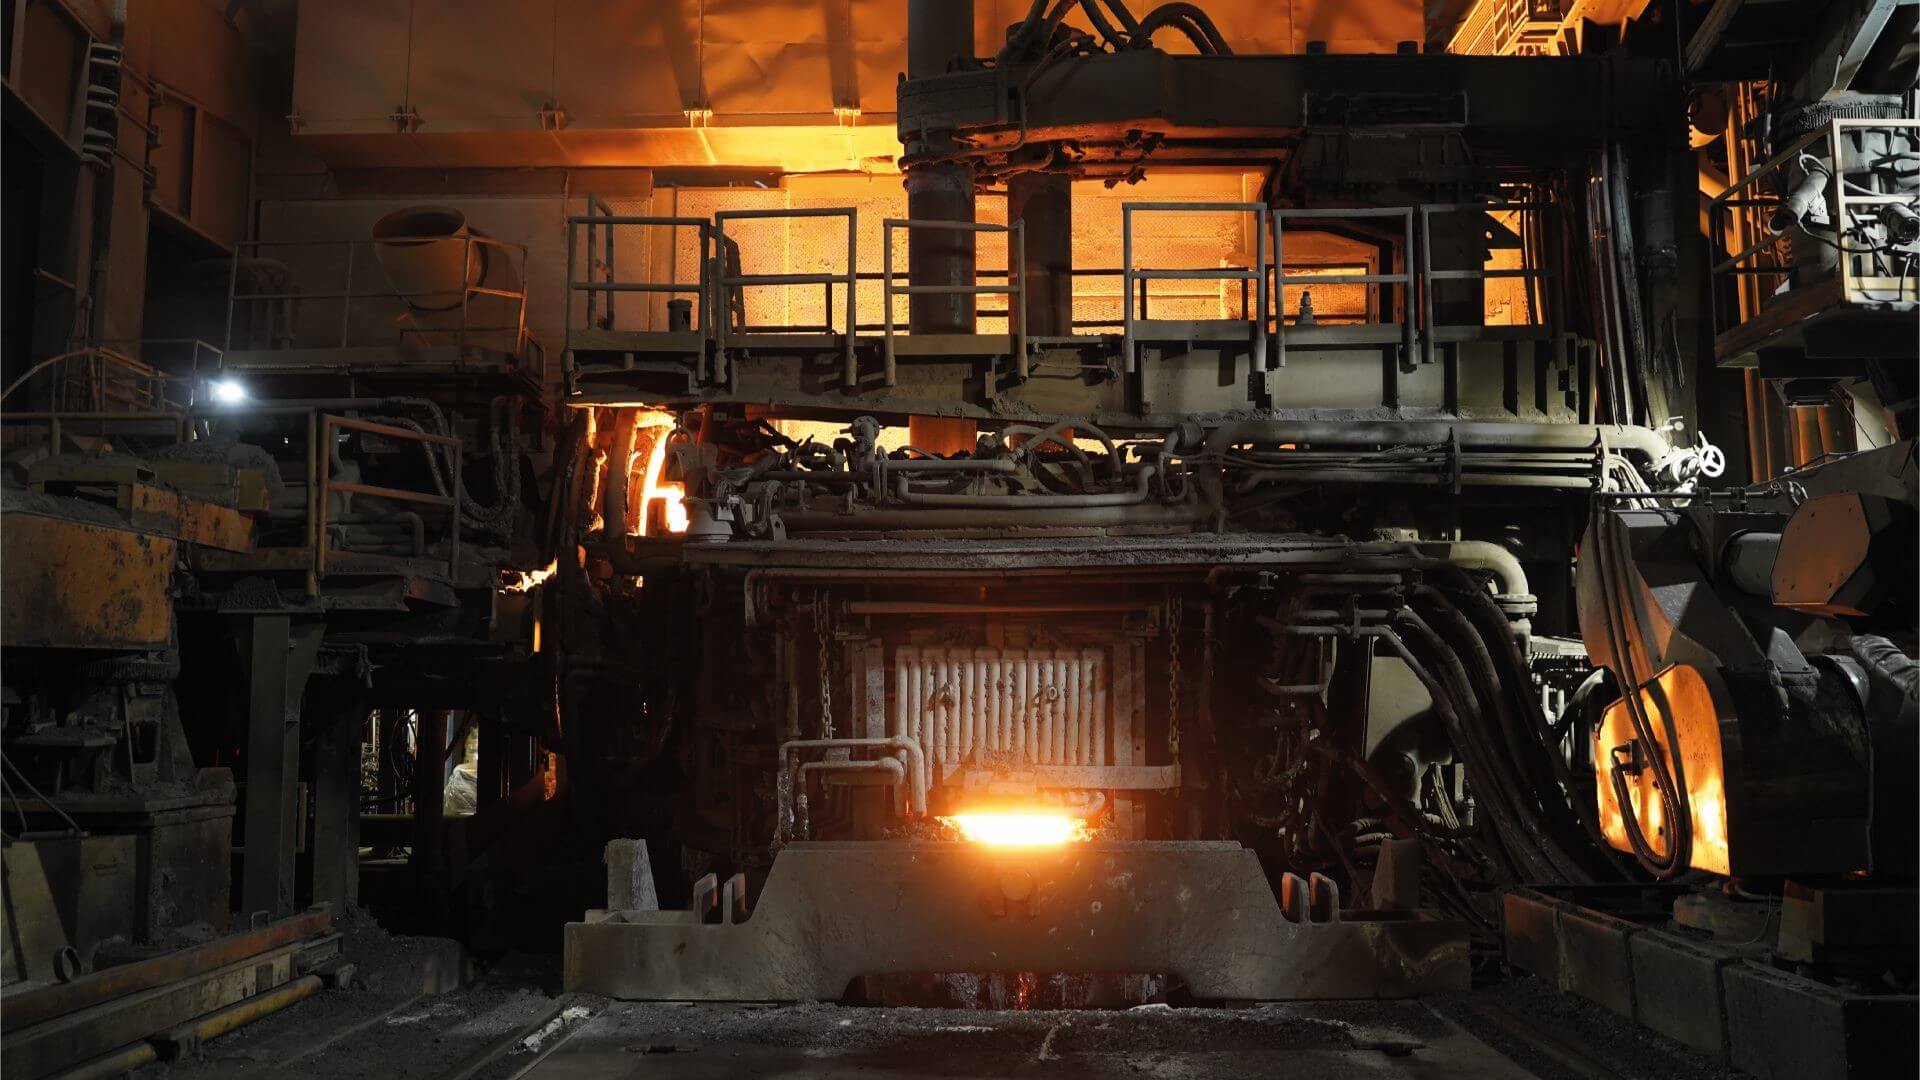 Furnace with bright orange fire against dark background of industrial plant